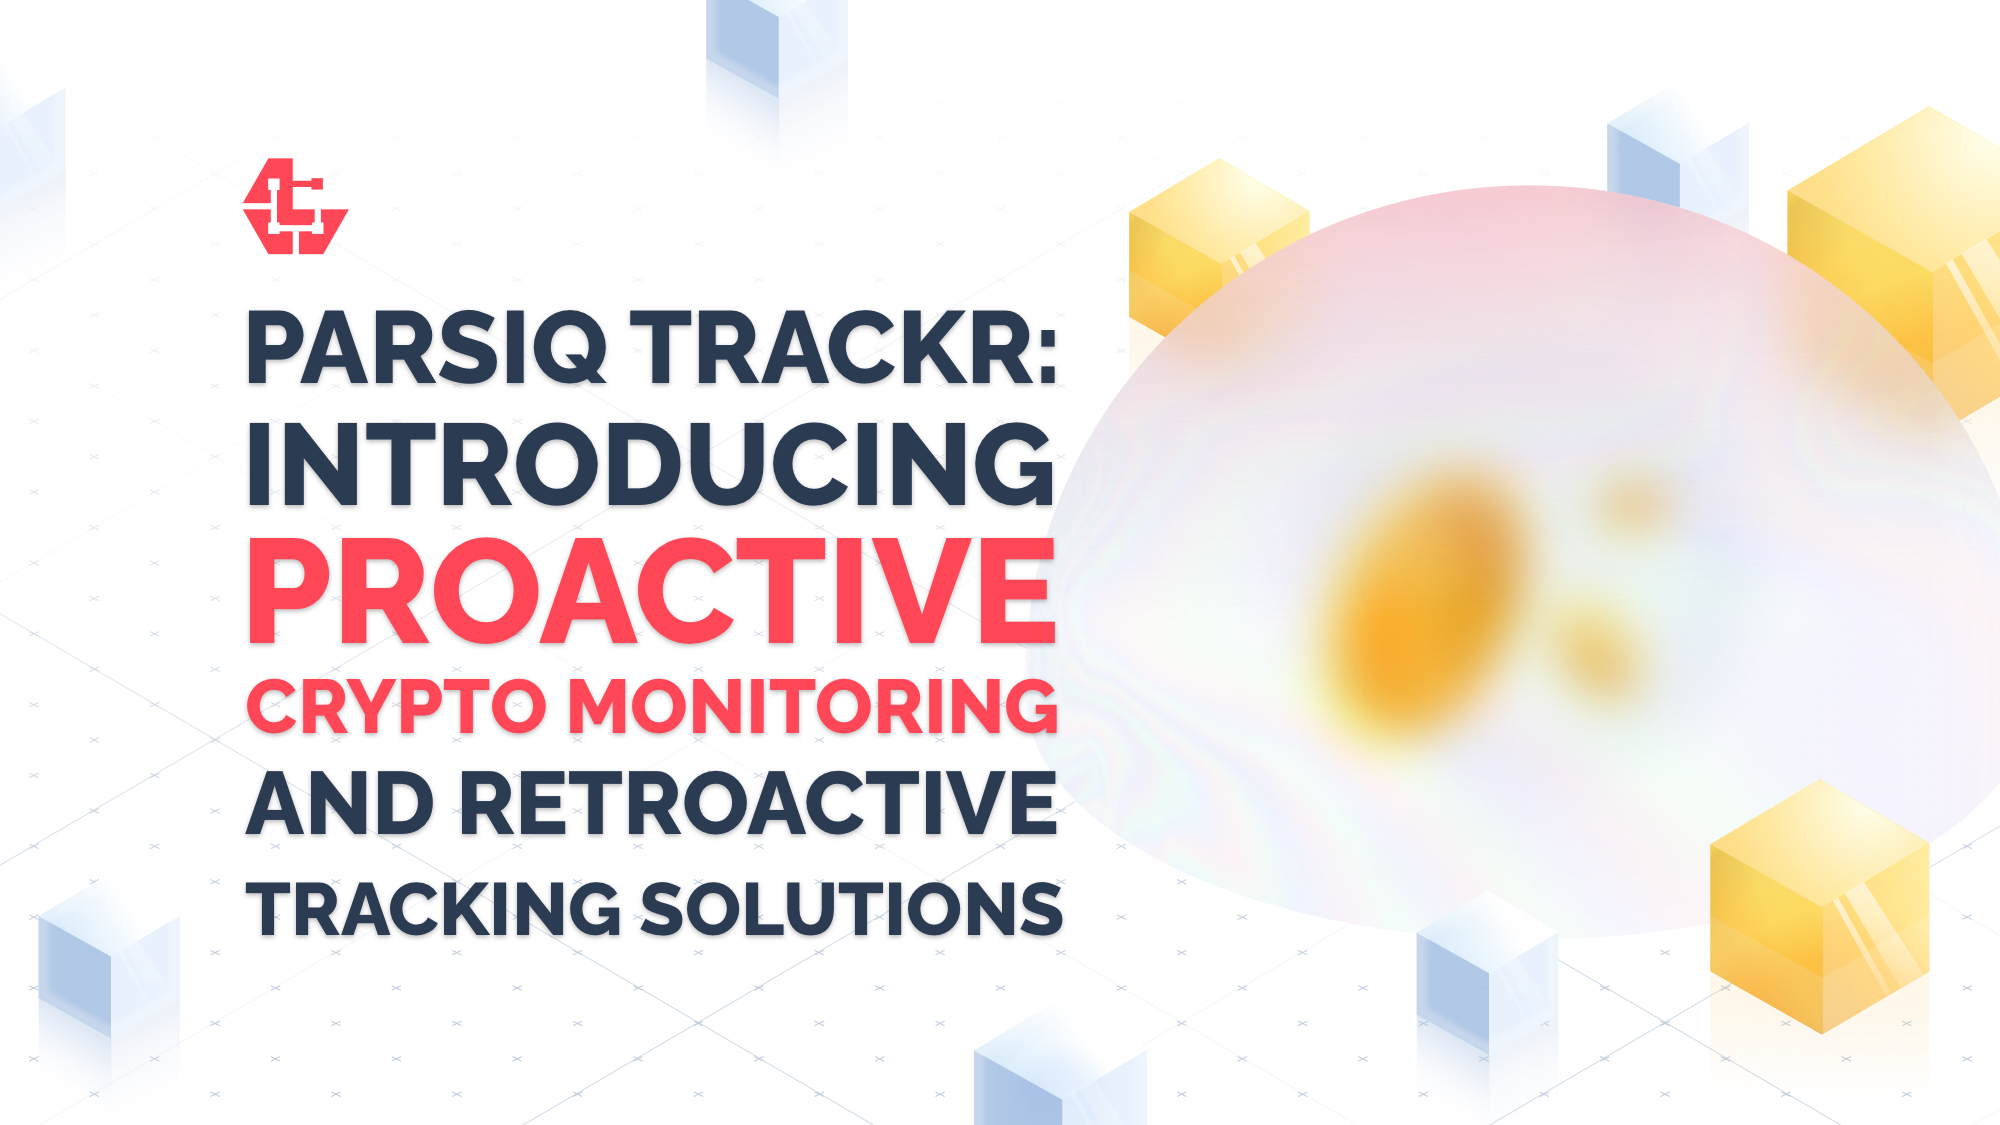 PARSIQ TRACKR: Introducing Proactive Crypto Monitoring and Retroactive Tracking Solutions